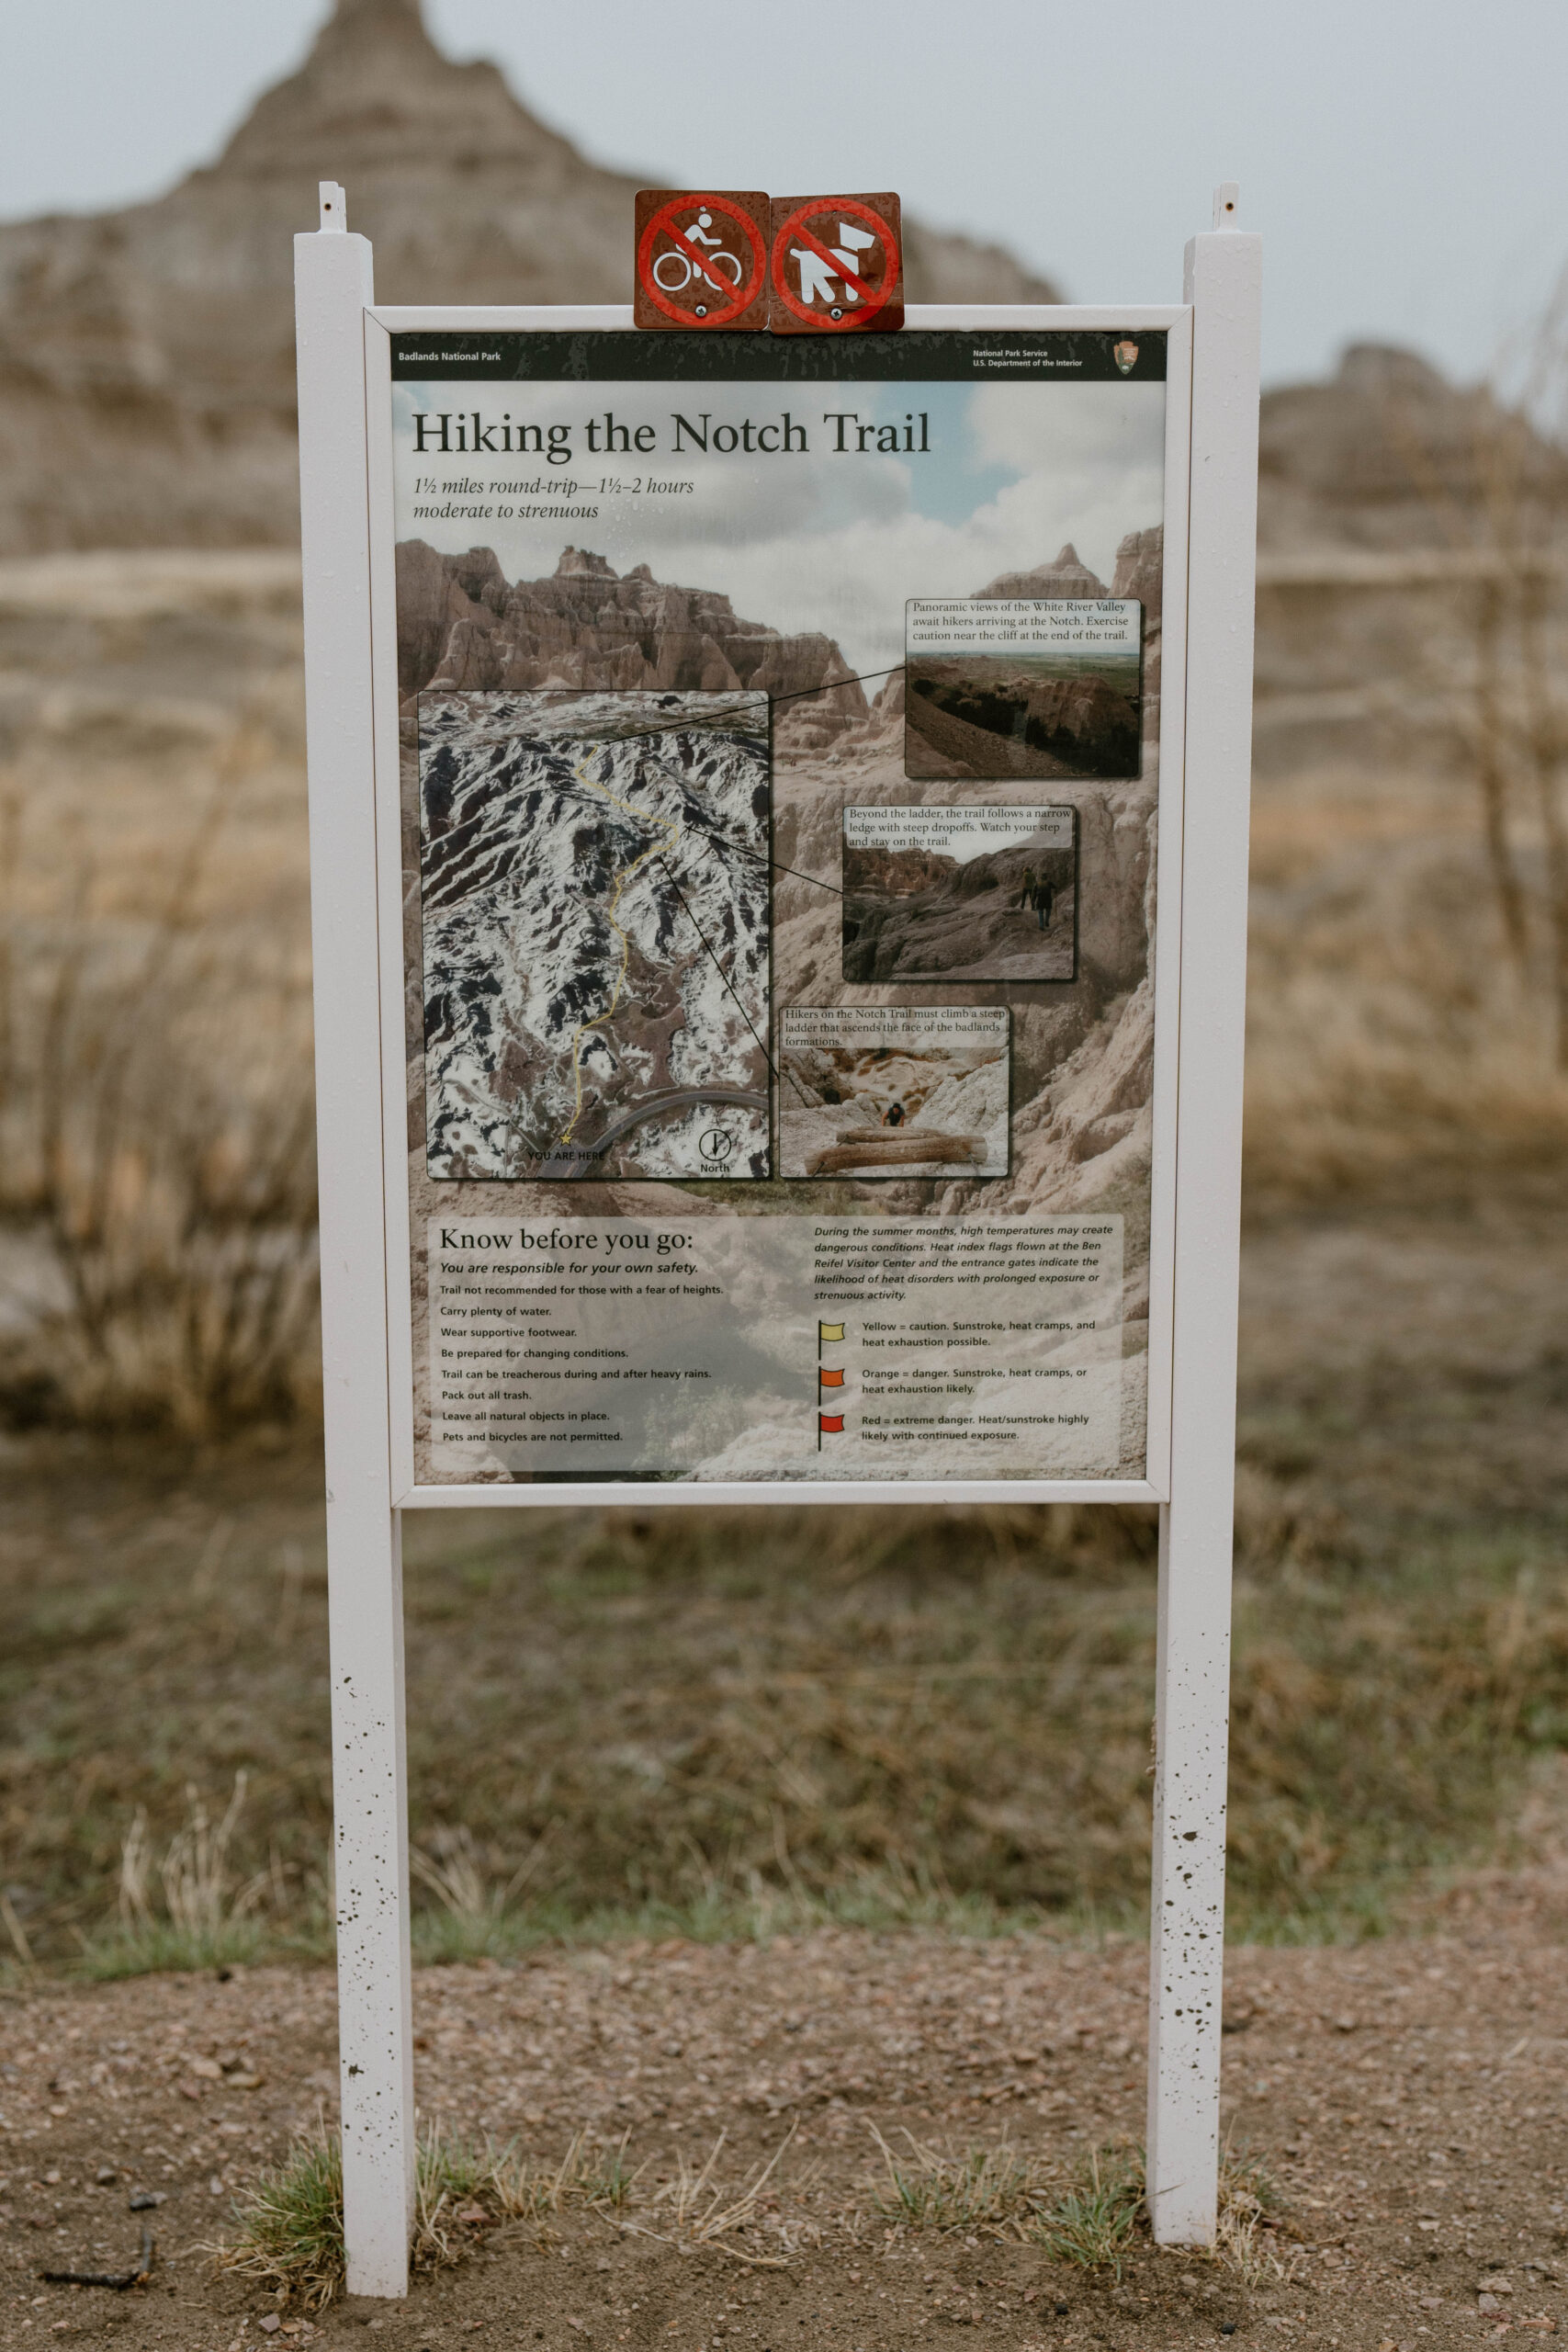 A sign of a hiking trail in Badlands National Park is pictured